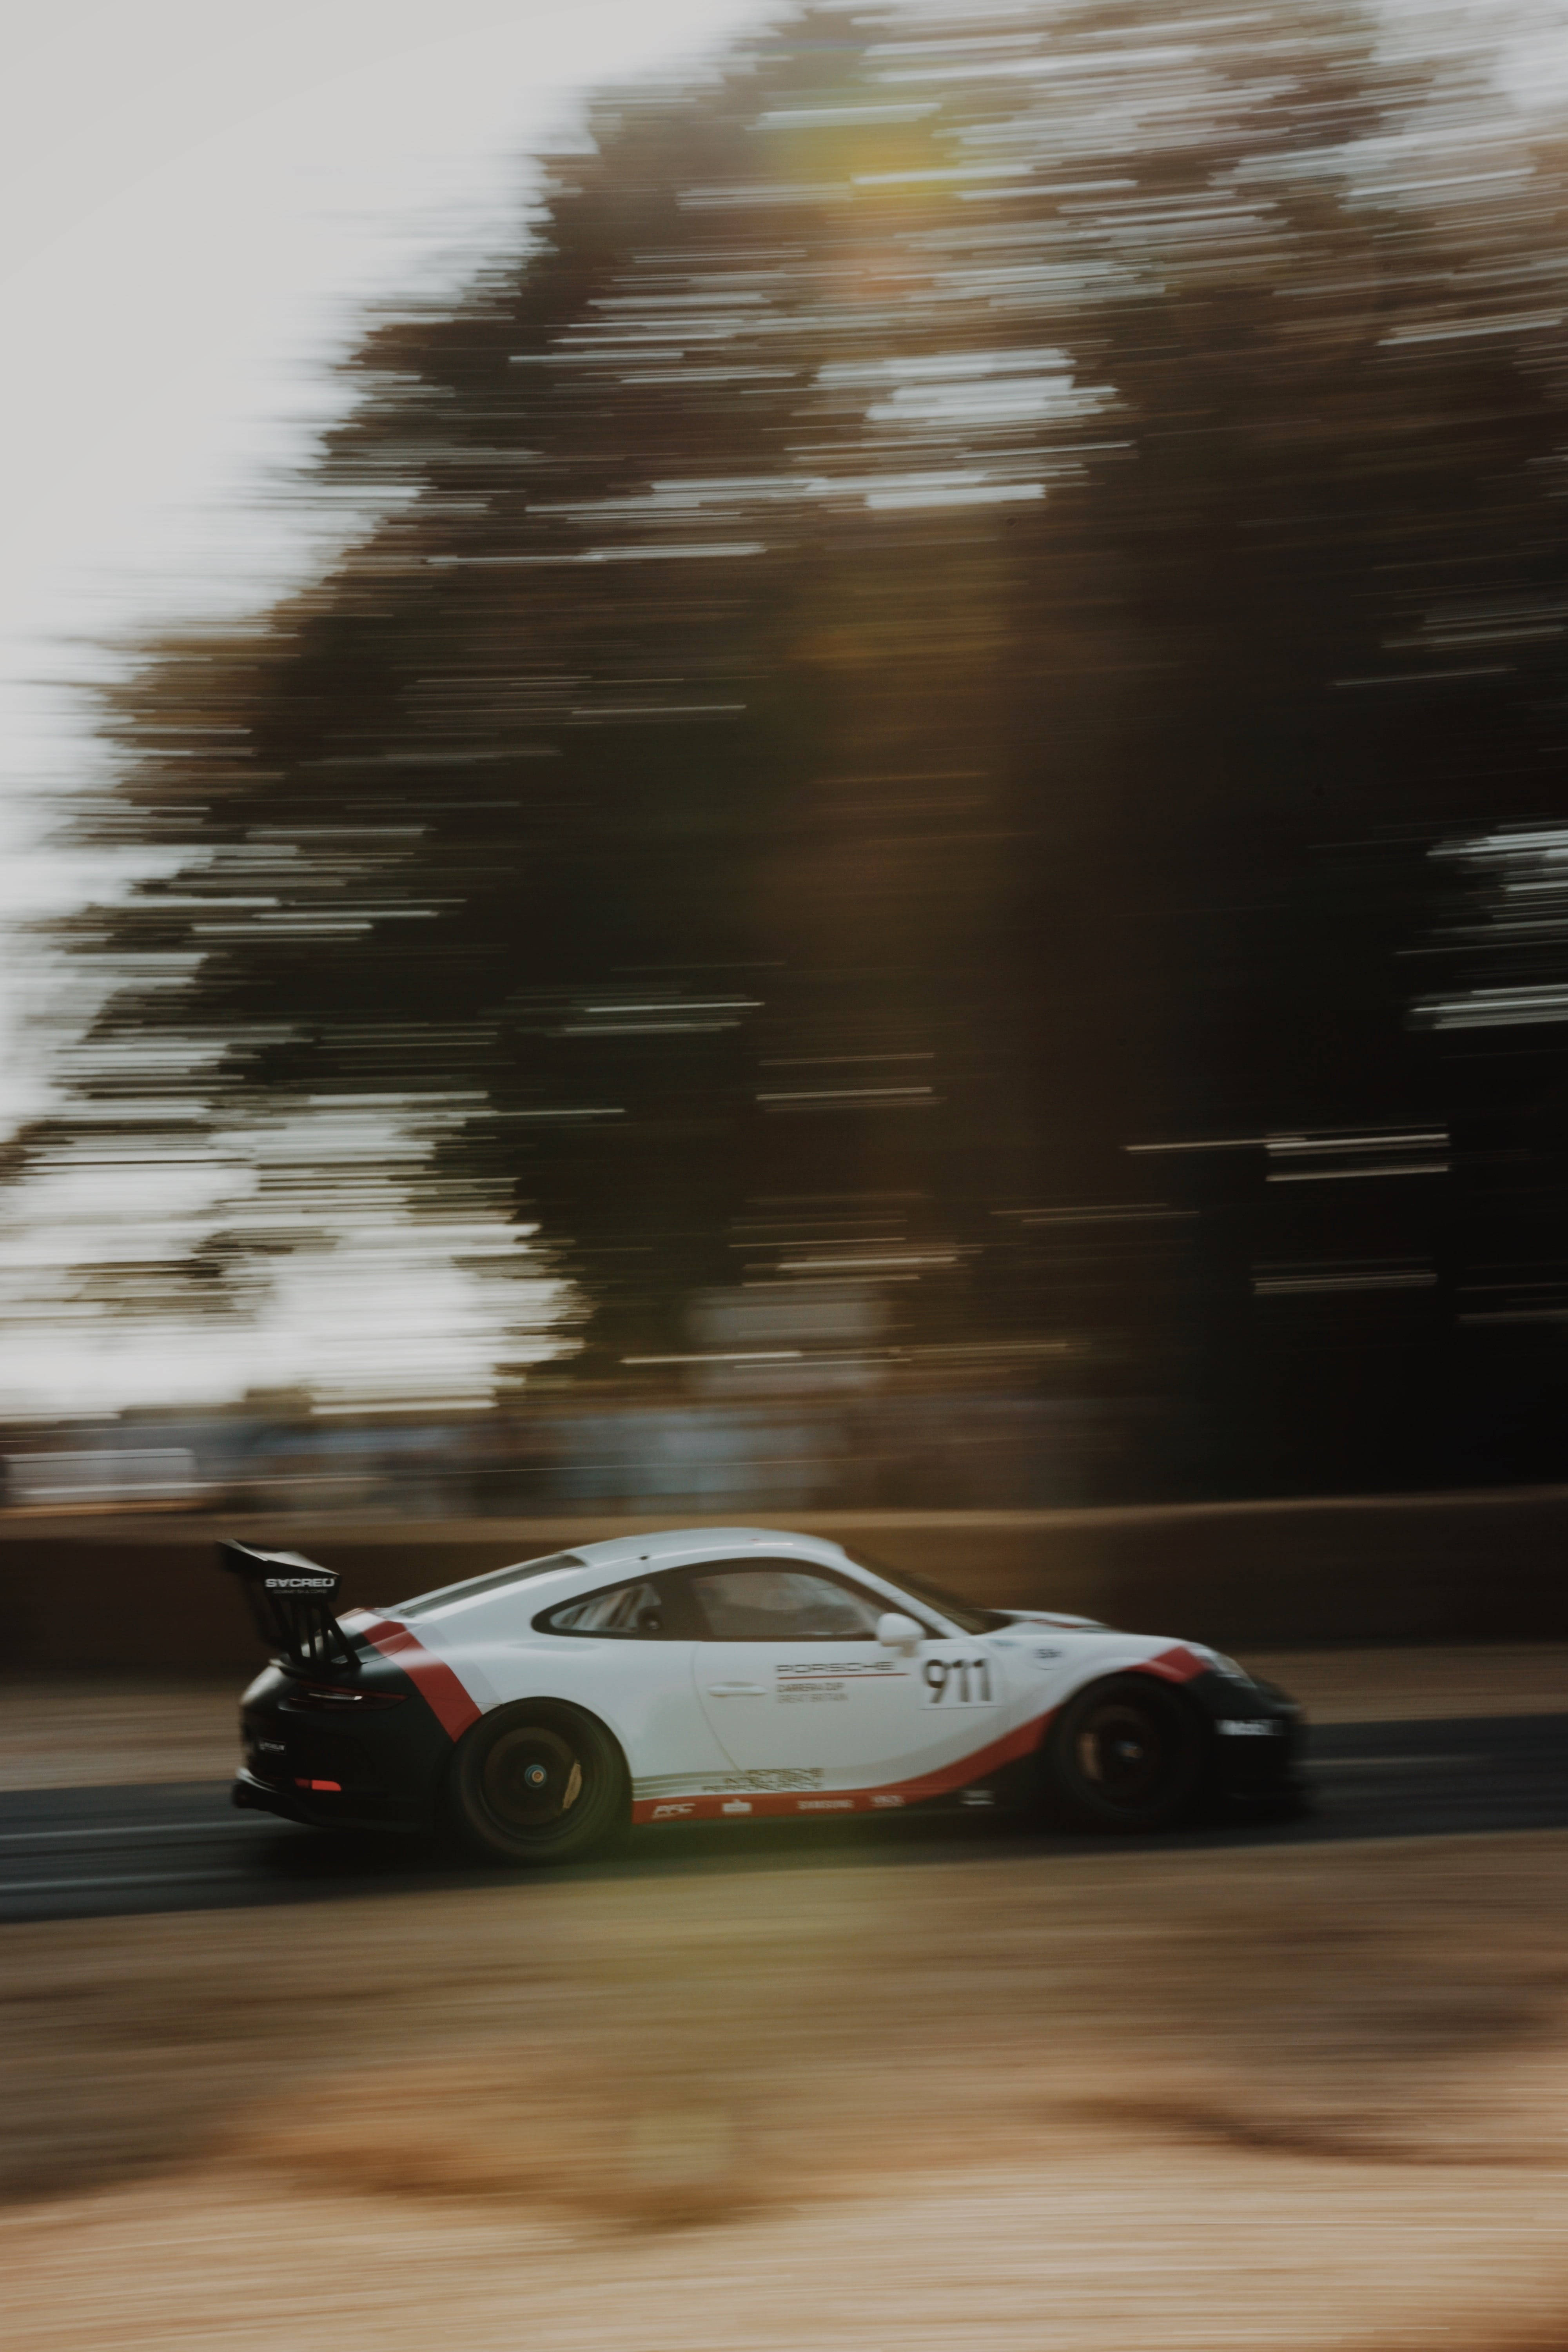 The Need For Speed – White Racecar In Action On Iphone Wallpaper Wallpaper